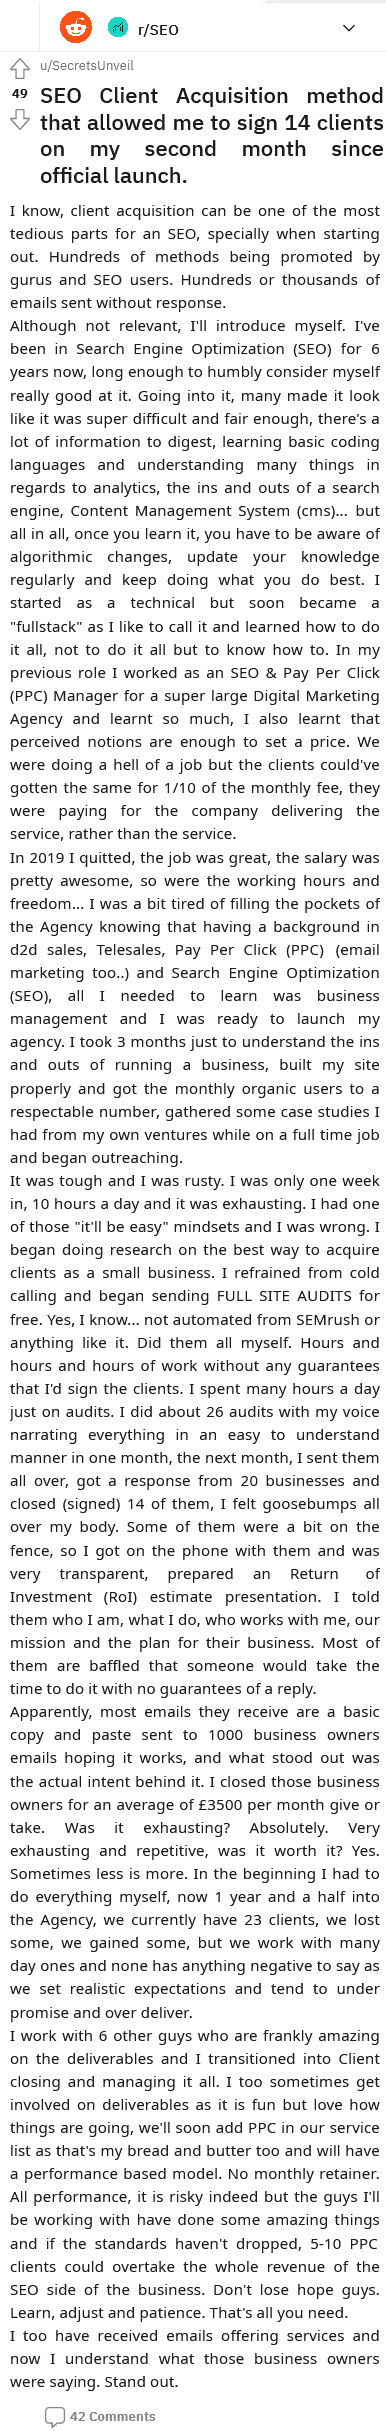 seo client acquisition i got 14 clients in my second month since i official launched